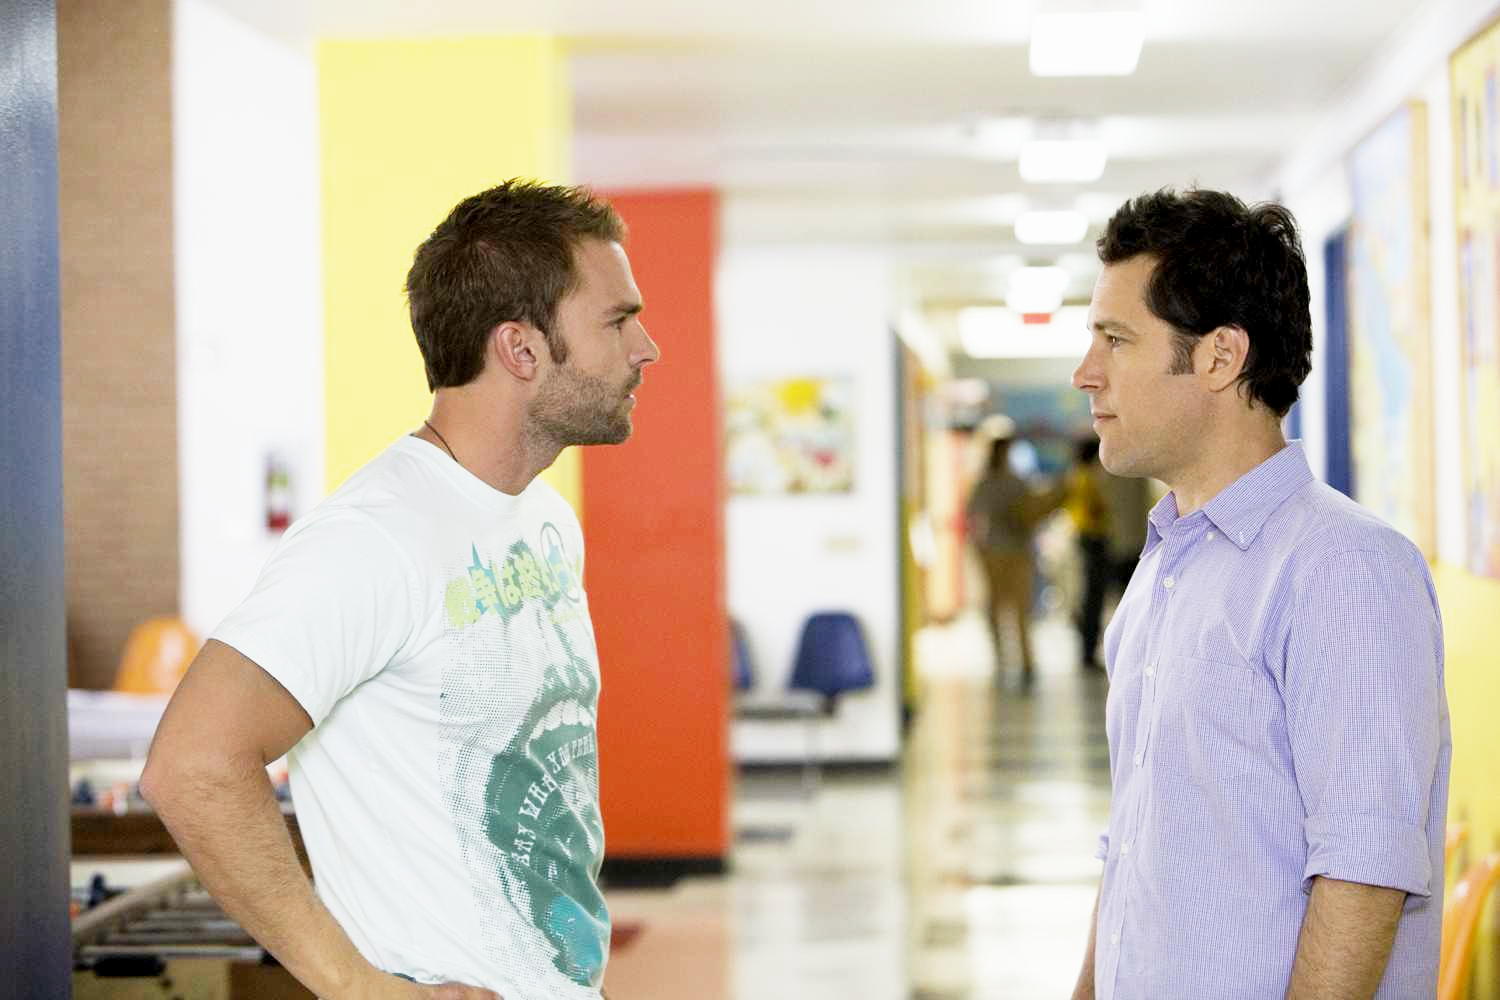 Seann William Scott stars as Wheeler and Paul Rudd stars as Danny Donahue in Universal Pictures' Role Models (2008)